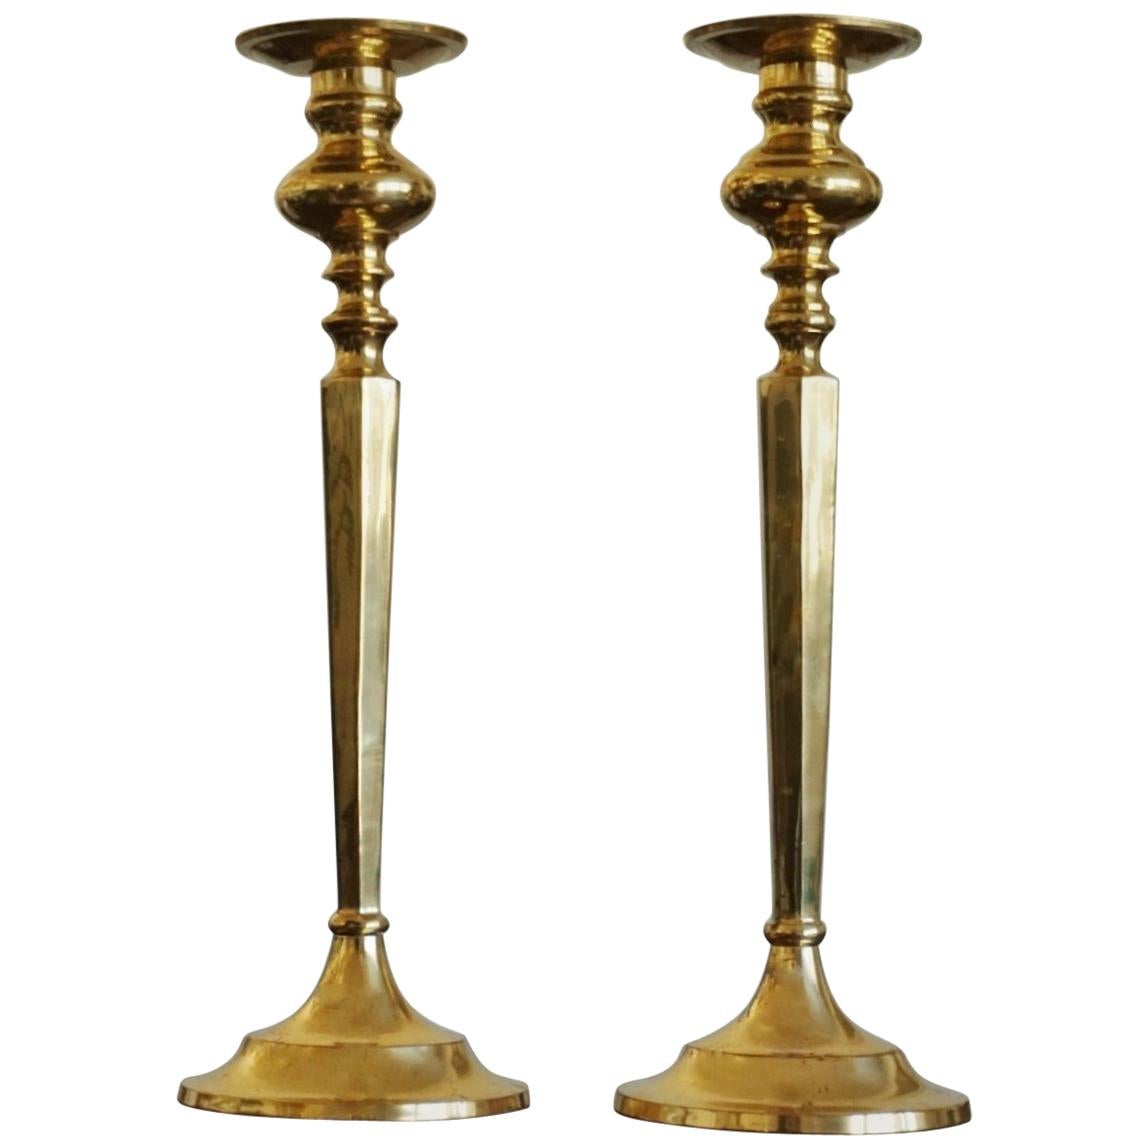 Pair of Solid Brass Altar Candleholders, France, Late 19th Century